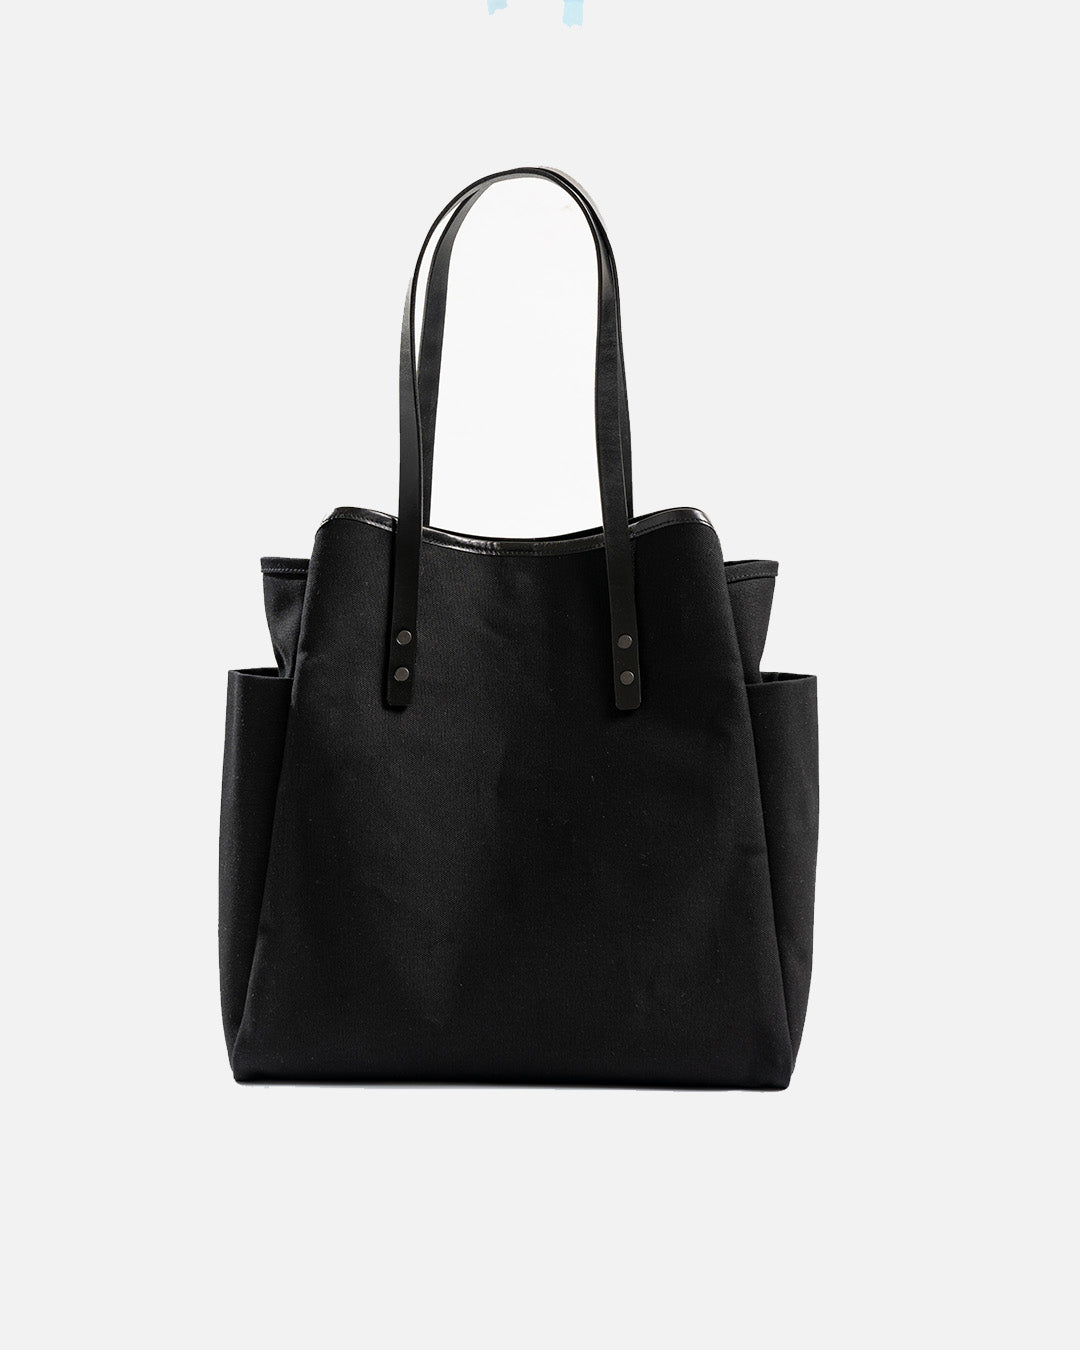 Southern Field Industries SHOPPER Tote - Black / Black – The 